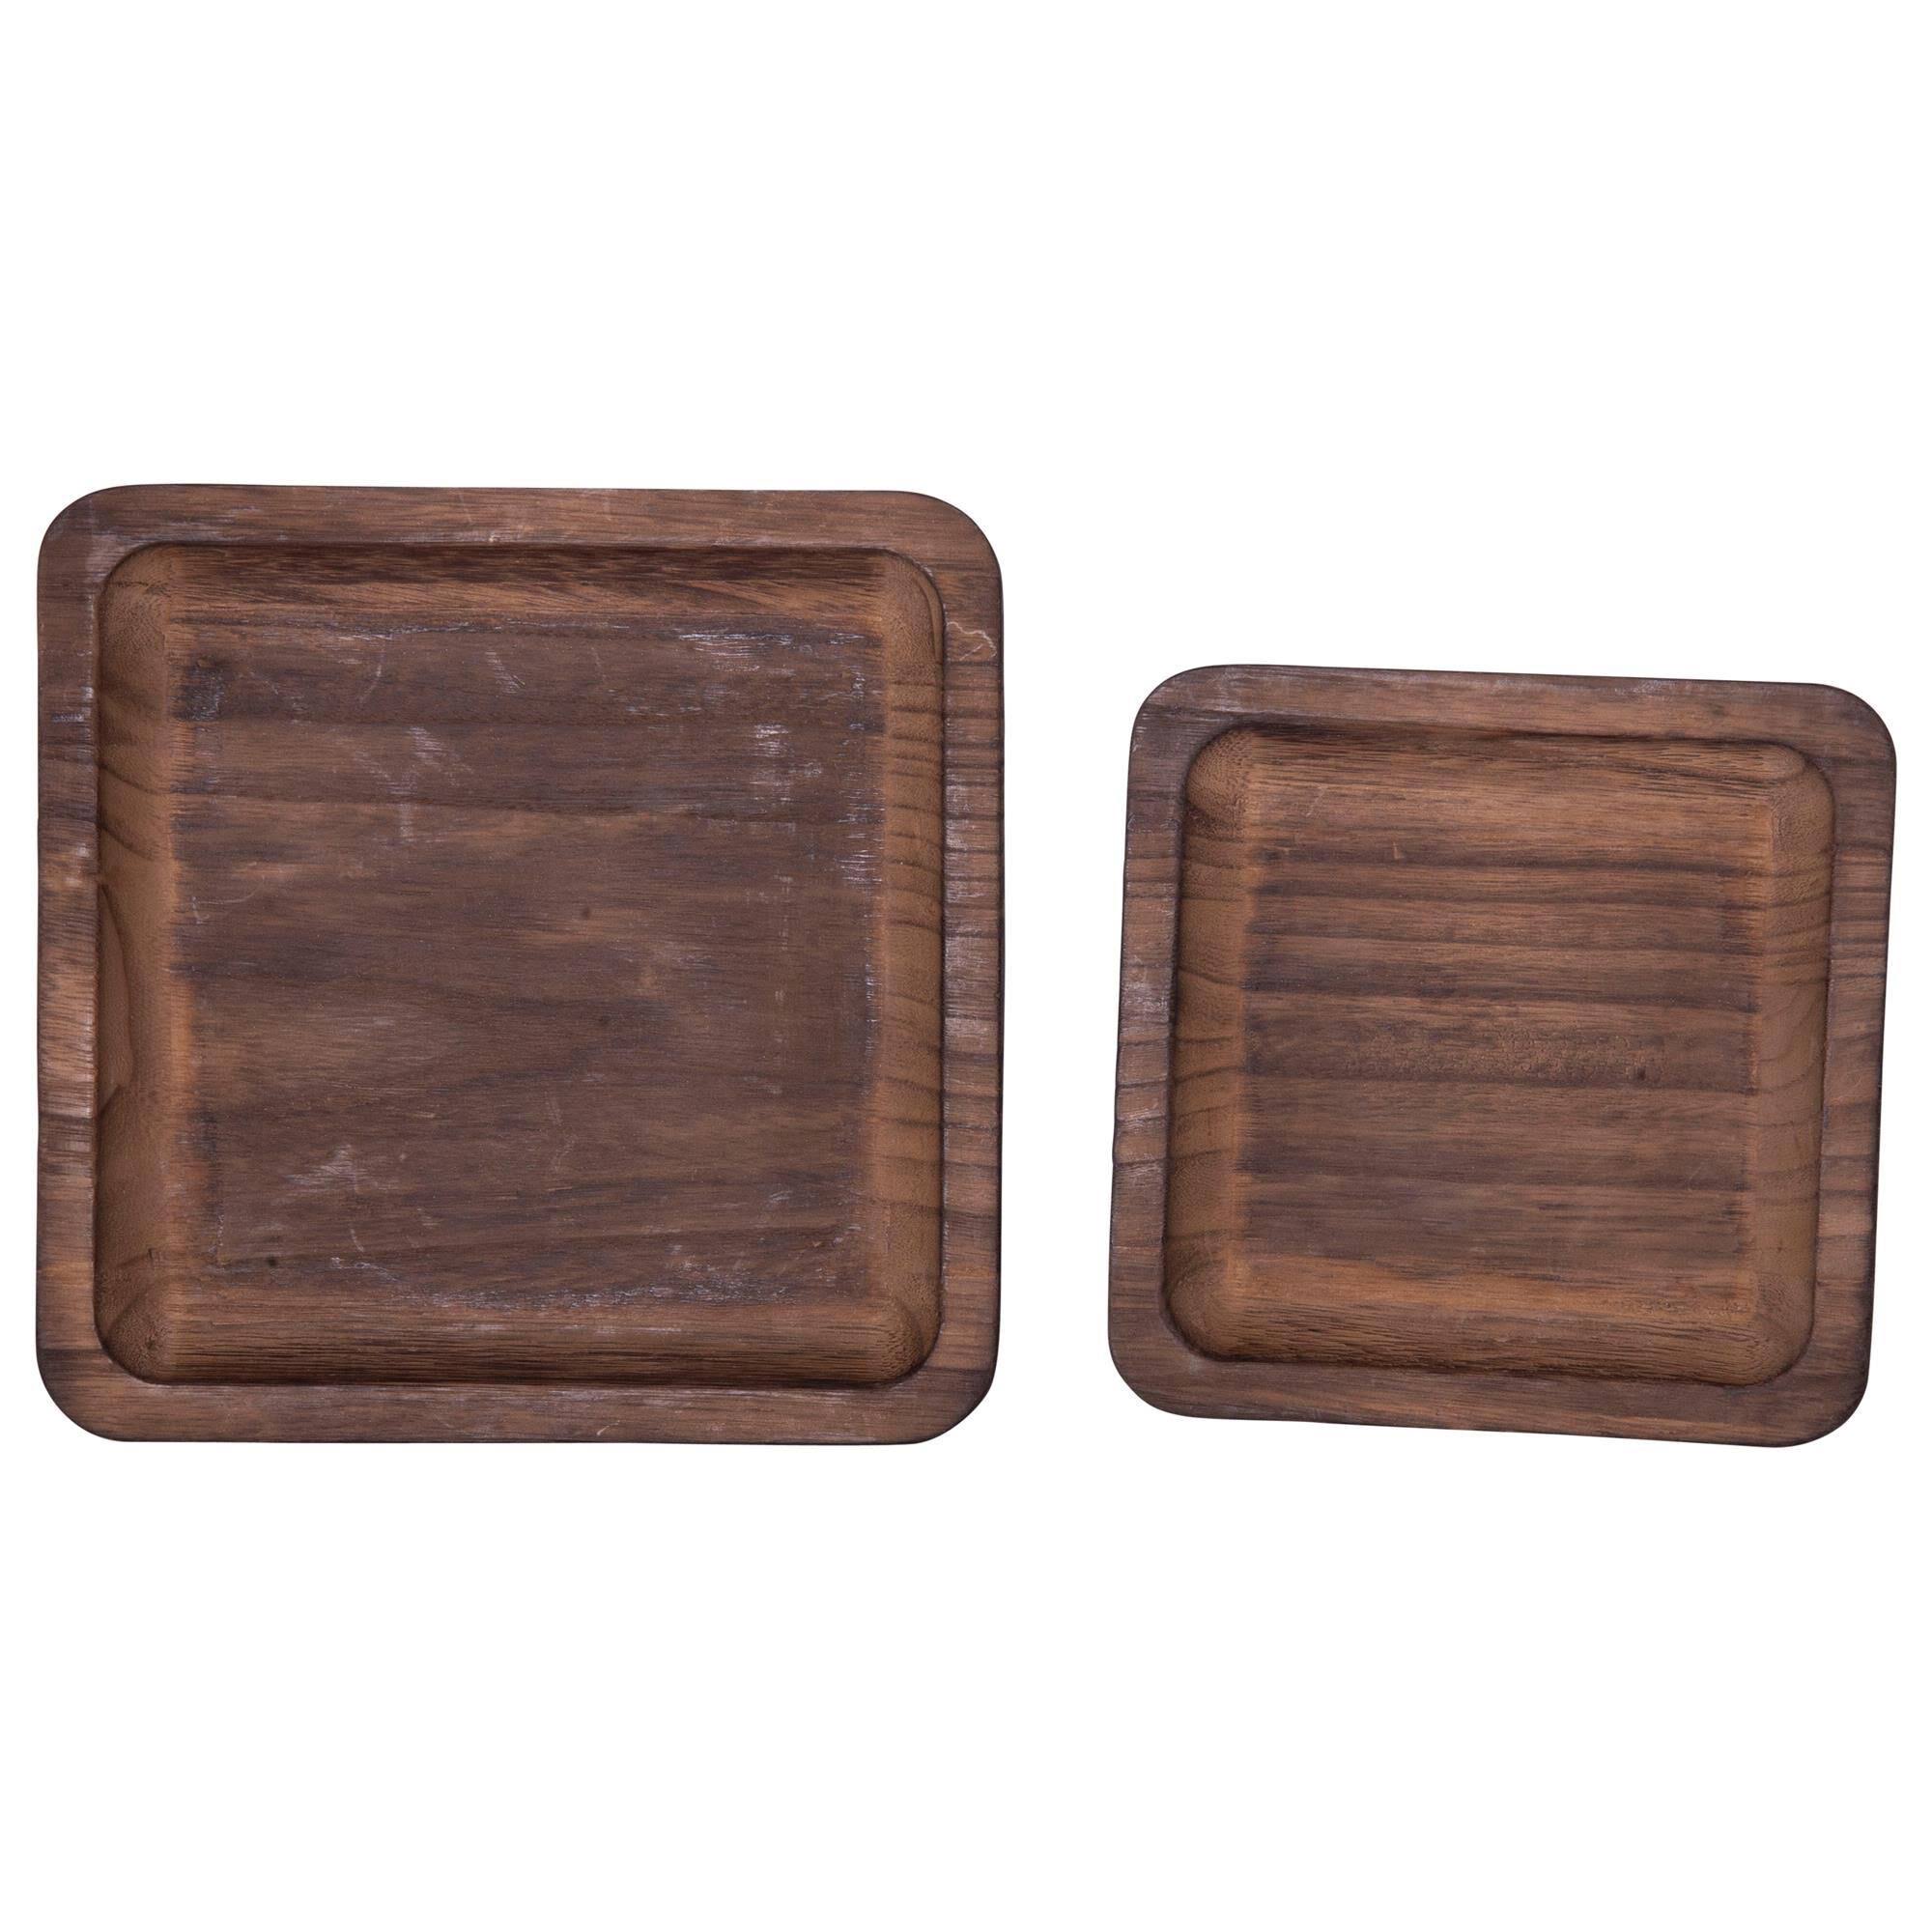 American Mercantile Brown Wood Serving Tray – Set of Two One-Size